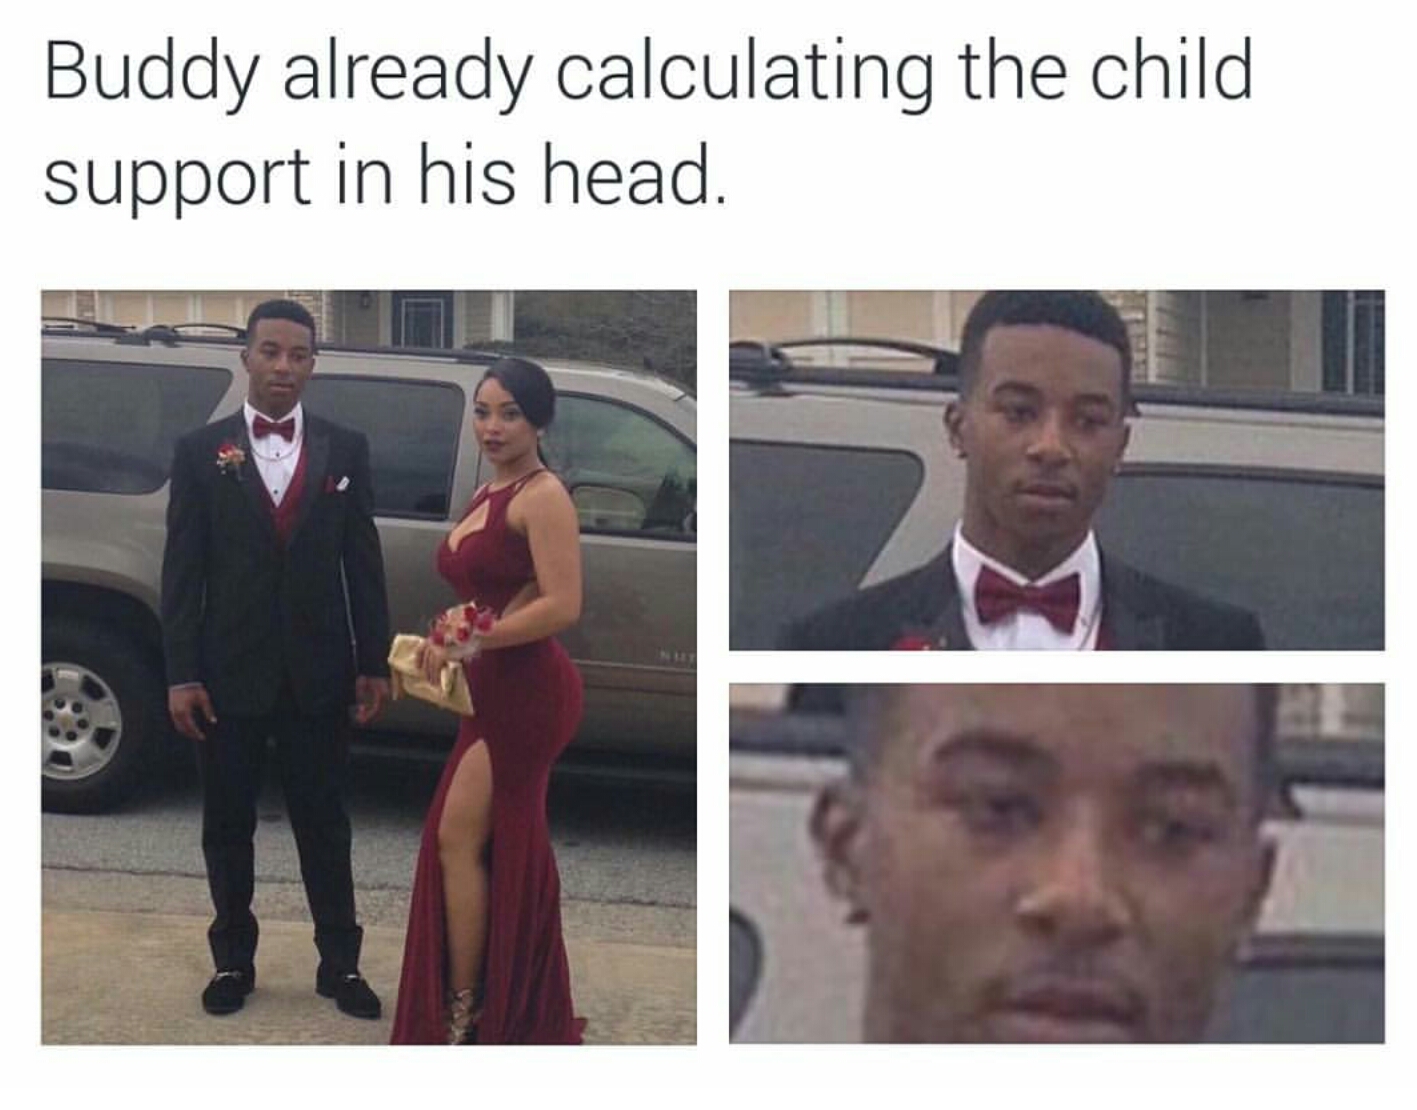 Dank meme of a zoom in on the guy's reaction to the girl's dress joked as he is doing the calculations for child support in his head.